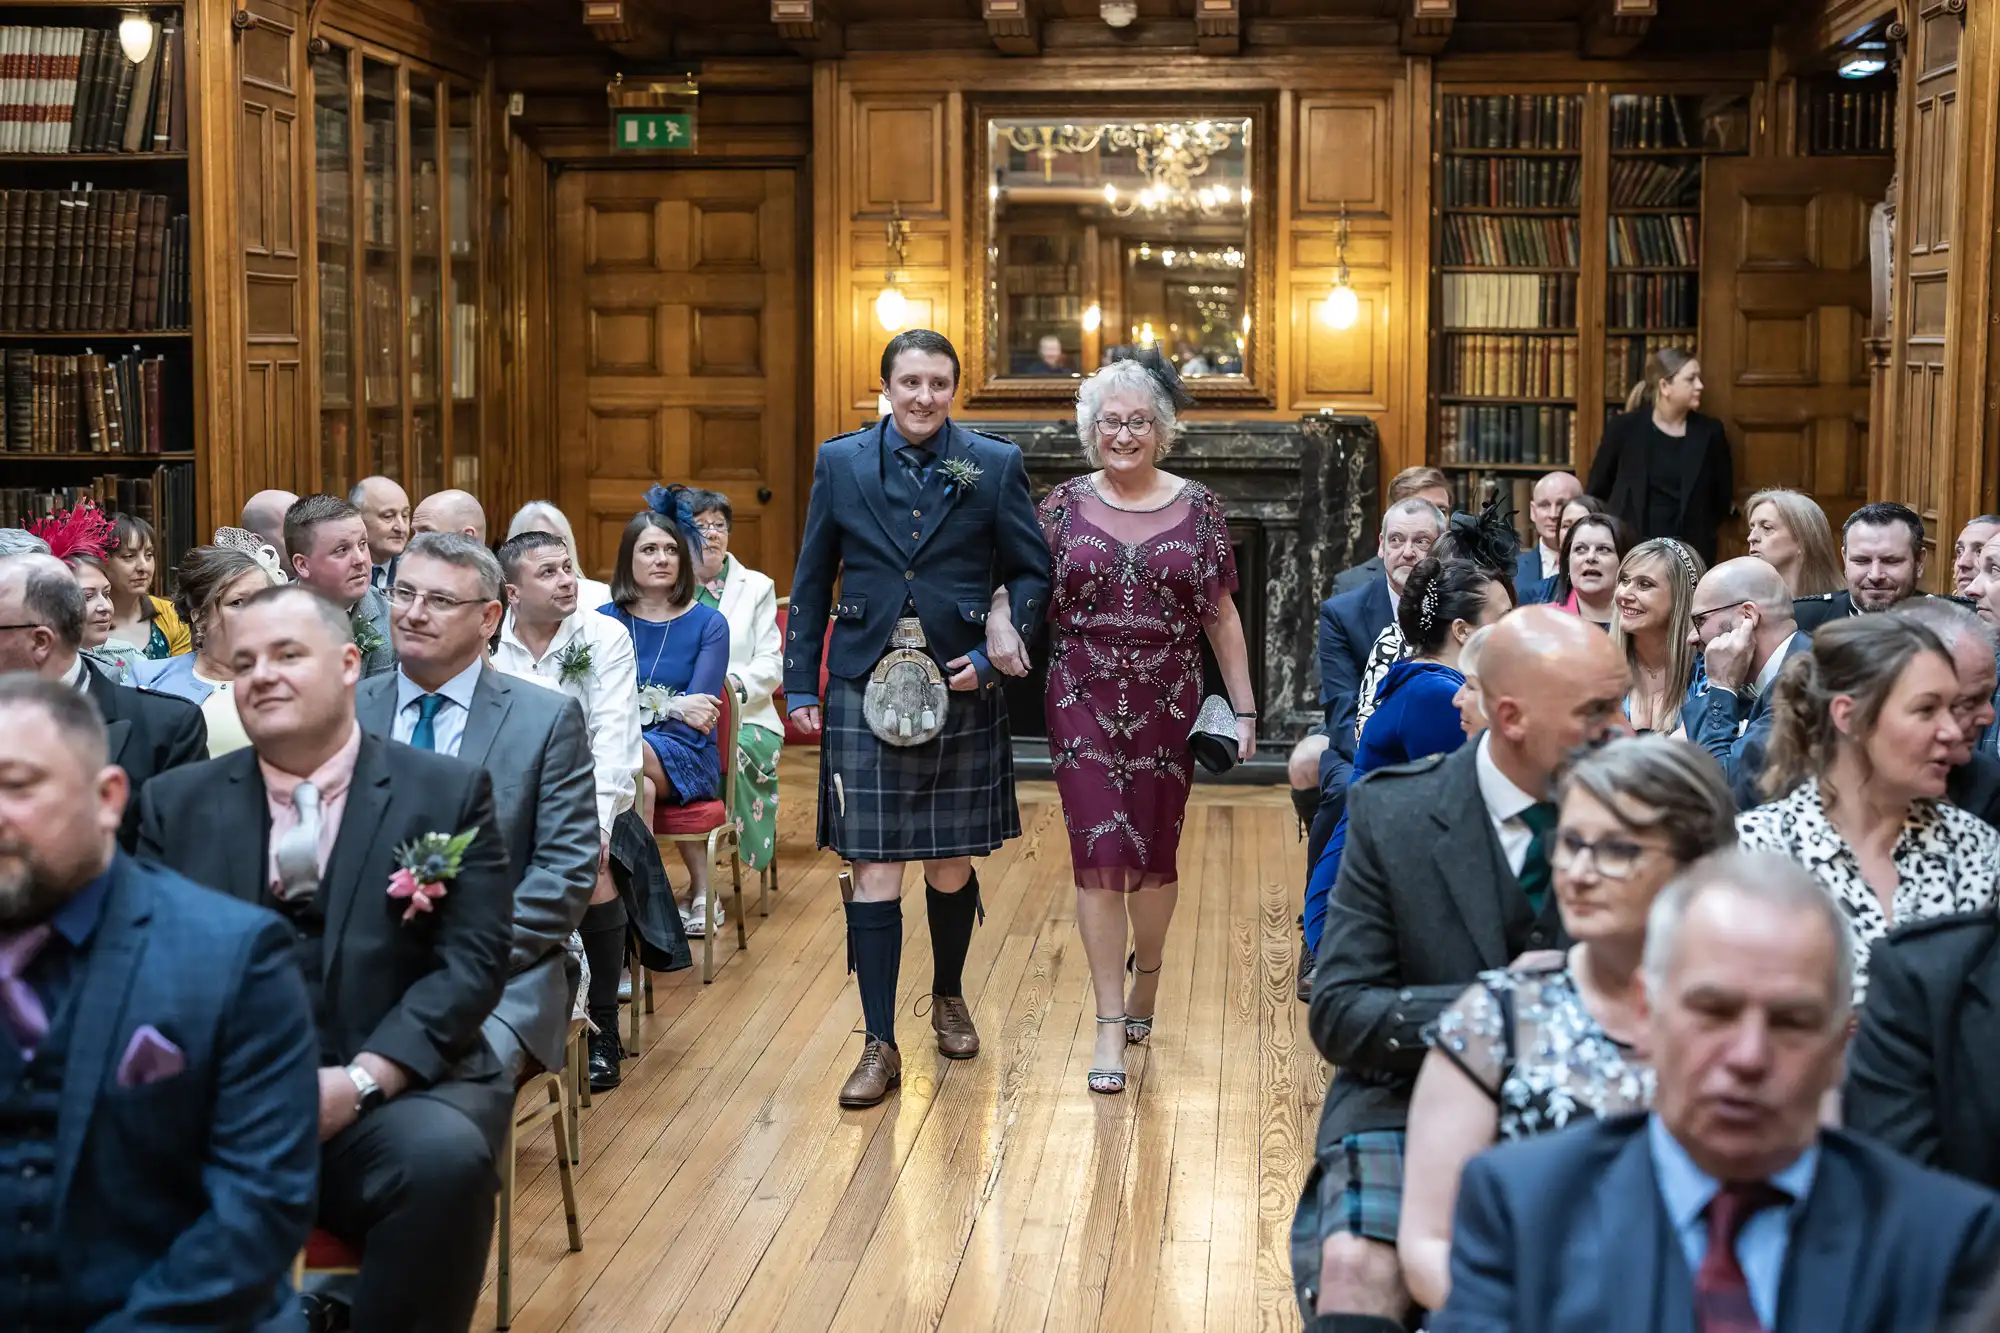 Two people walk down the aisle in a wood-paneled room filled with seated guests. The person on the left wears a kilt, and the person on the right wears a red dress.